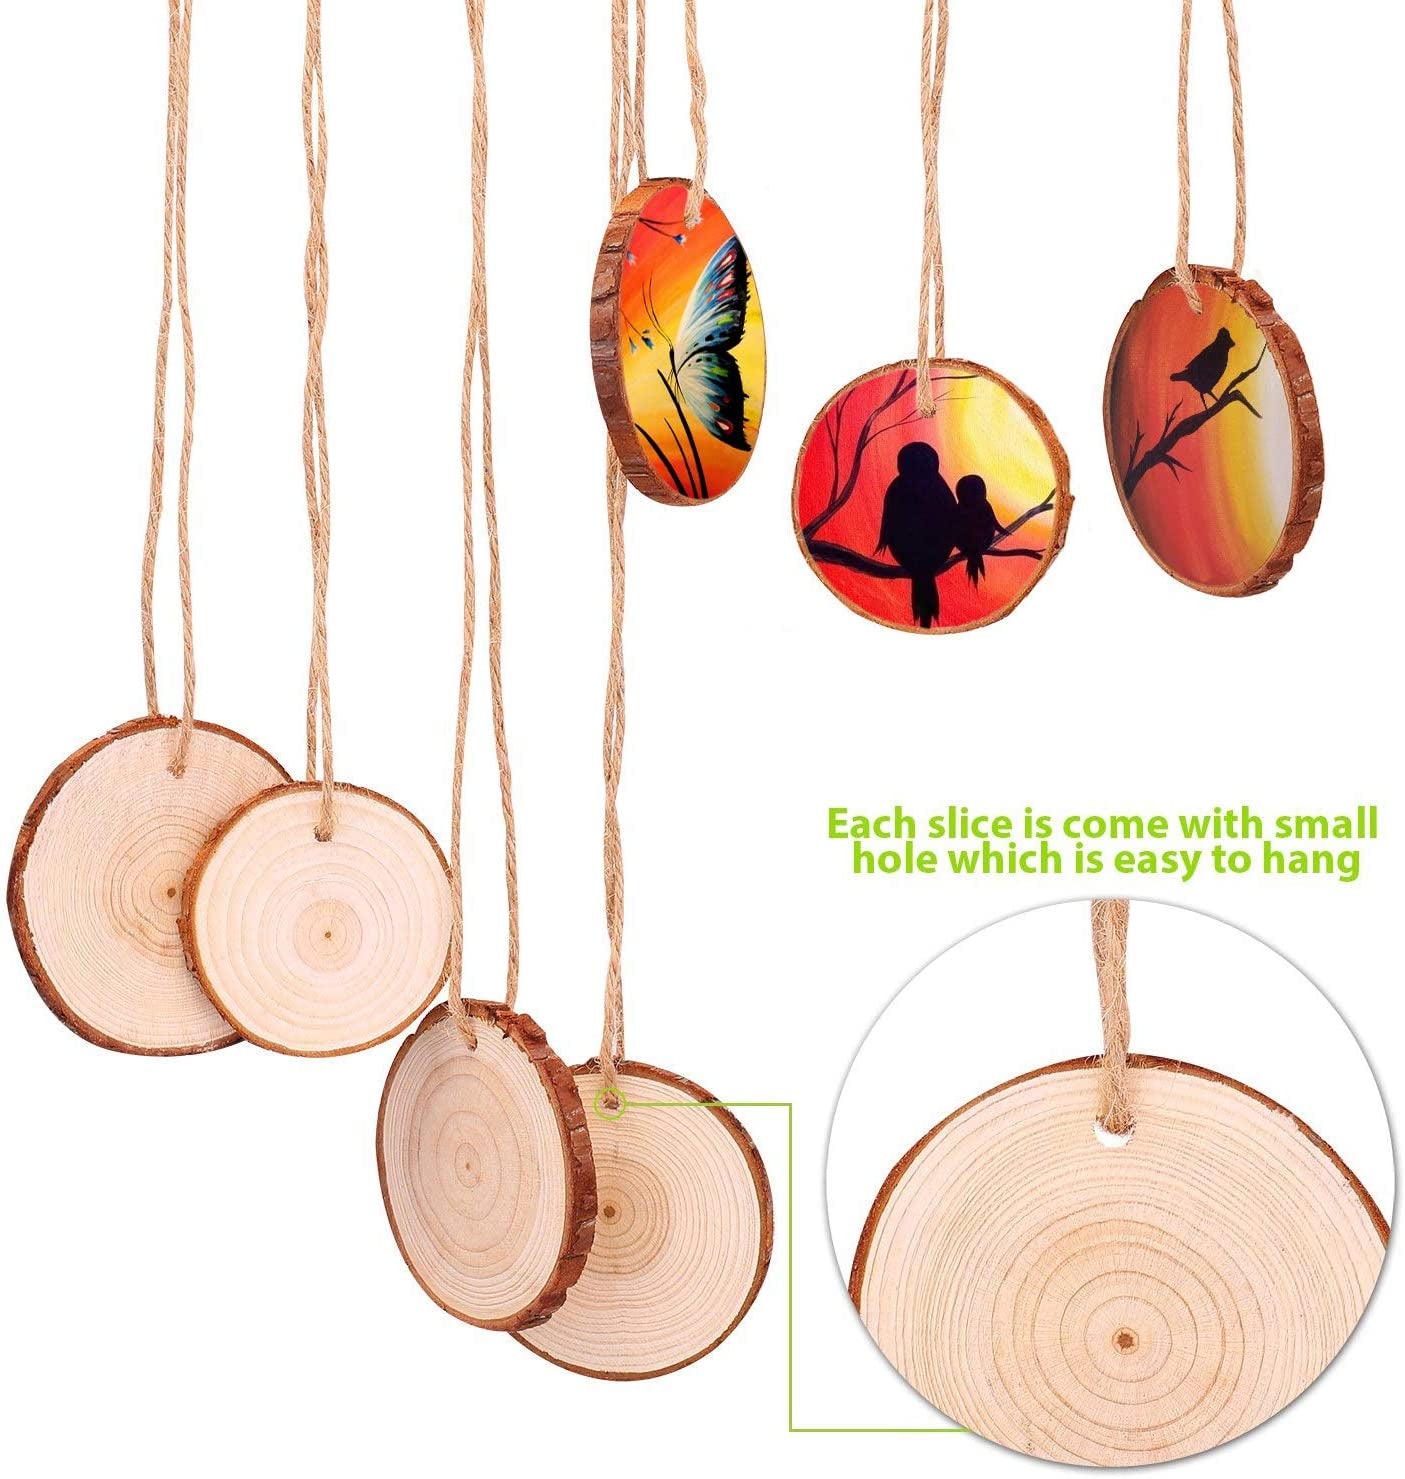 Natural Wood Slices, 30 Pcs 3.5-4 Inch Unfinished Predrilled Wooden Circles Tree Slice with Hole & Barks for DIY Arts Craft Christmas Ornaments